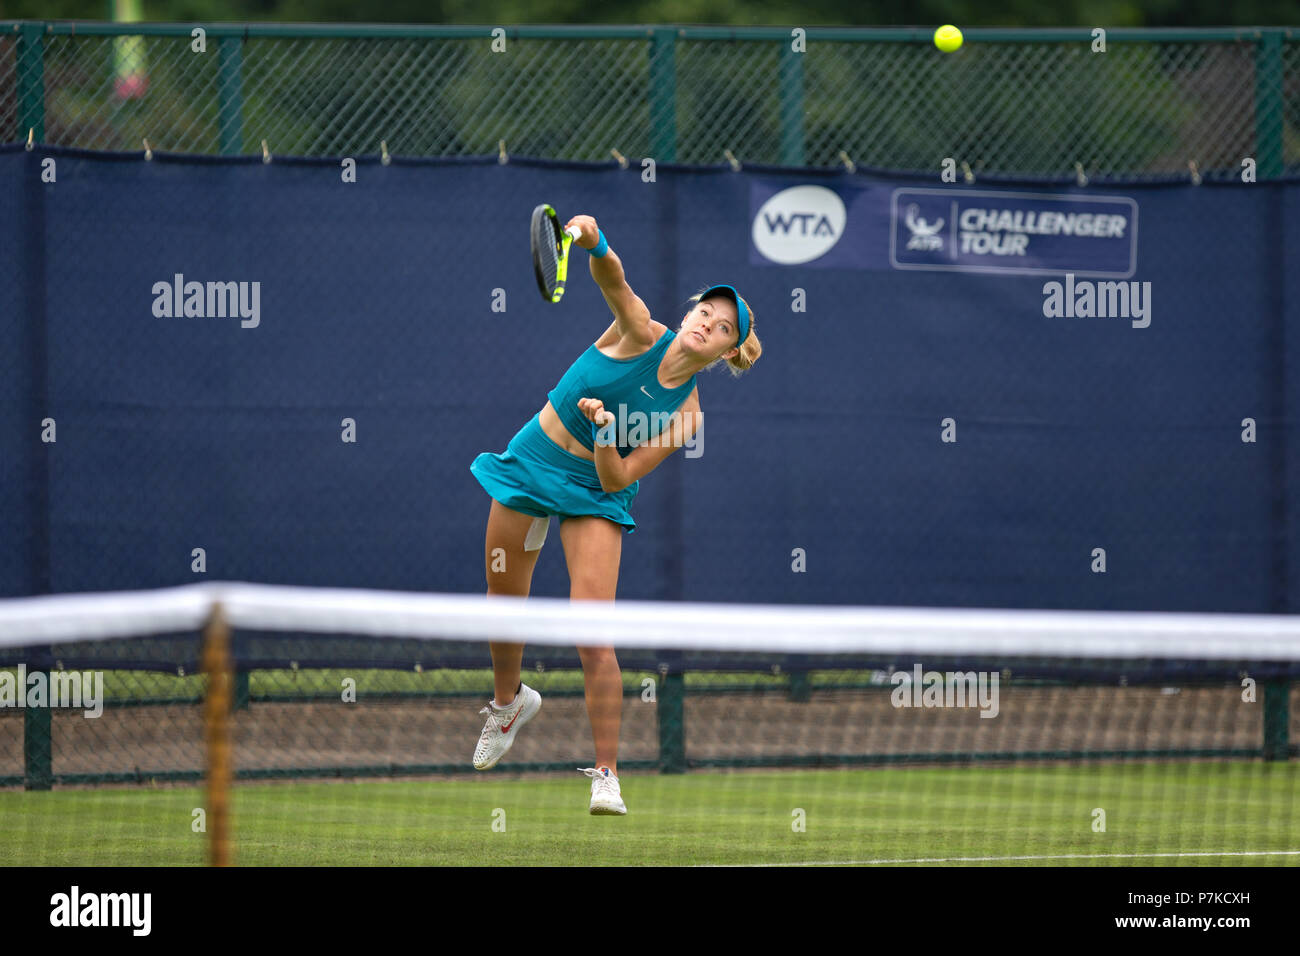 Katie Swan, professional British tennis player, in the middle of a serve during a match at the 2018 Nature Valley Open. Swan is pictured in the air with the ball, visible in shot, having left her racket. Stock Photo